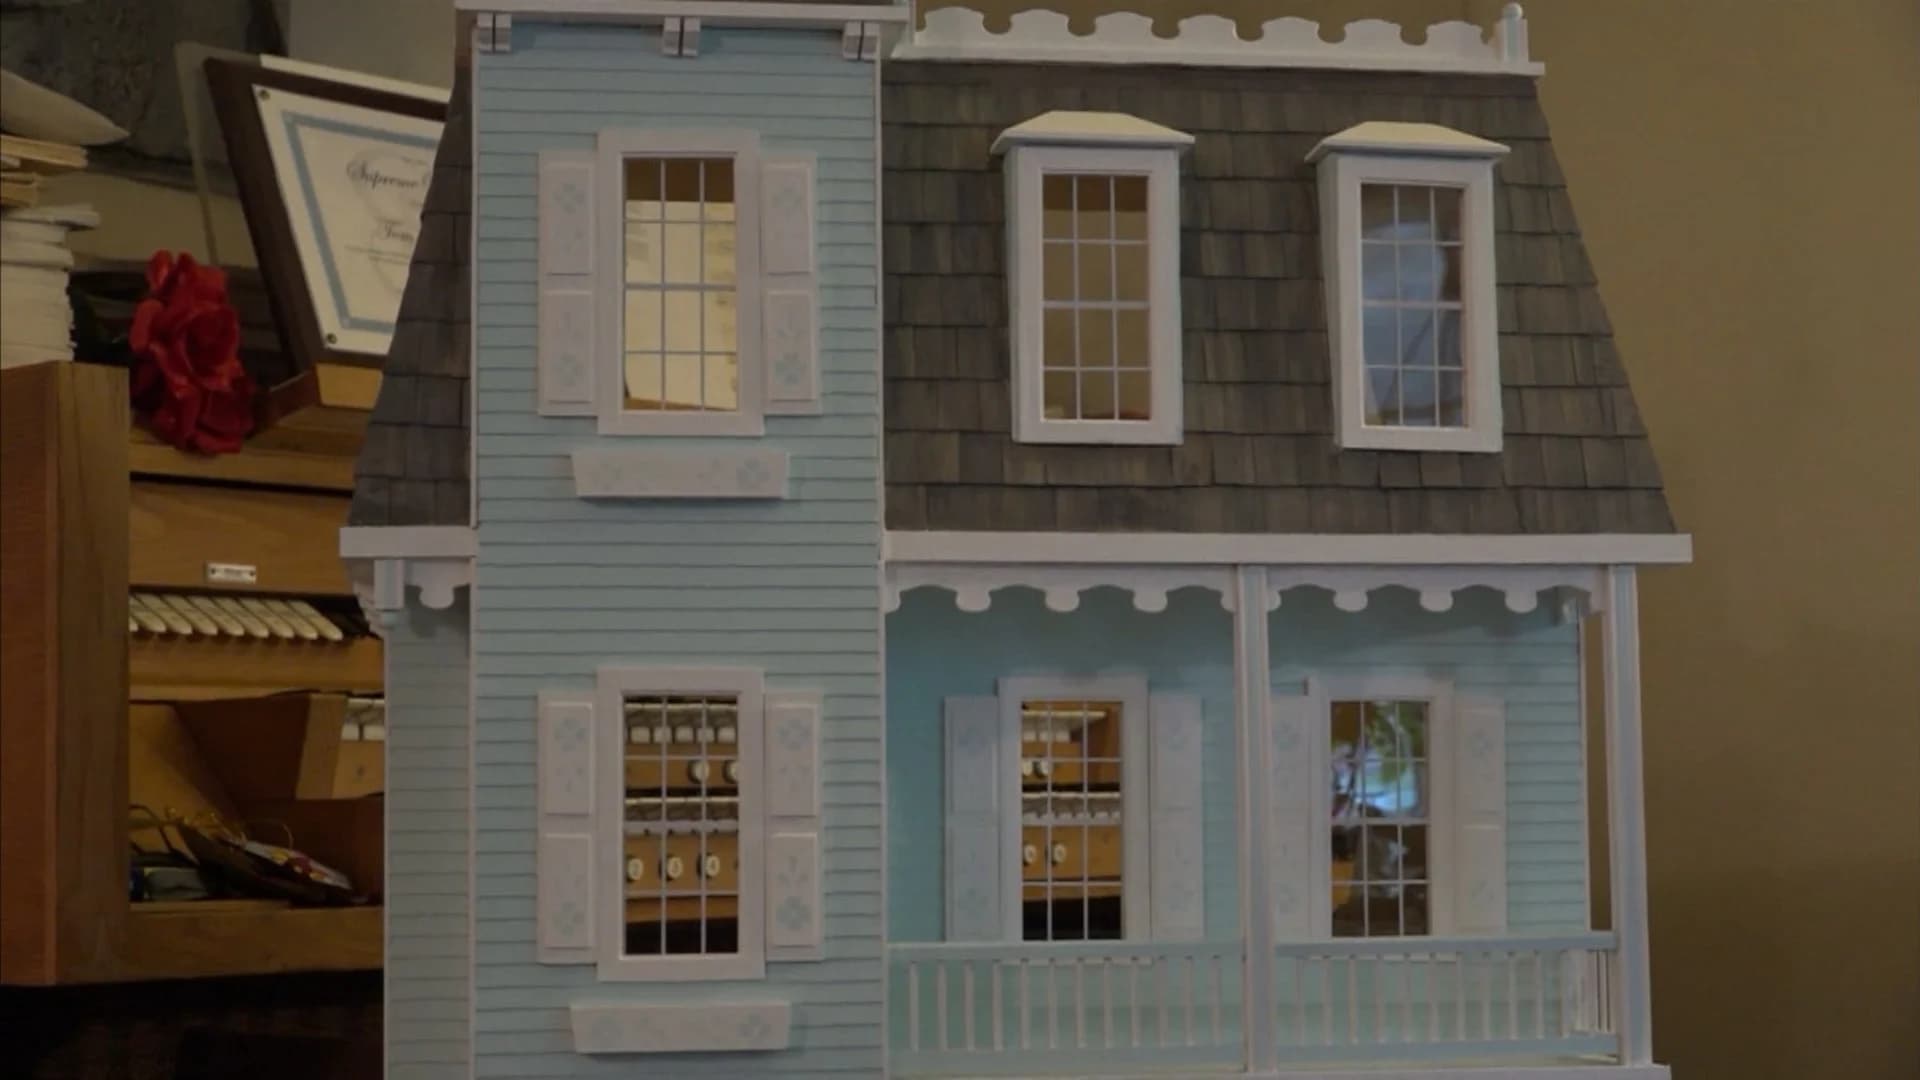 Veteran to auction off handmade dollhouse to benefit NY firefighter